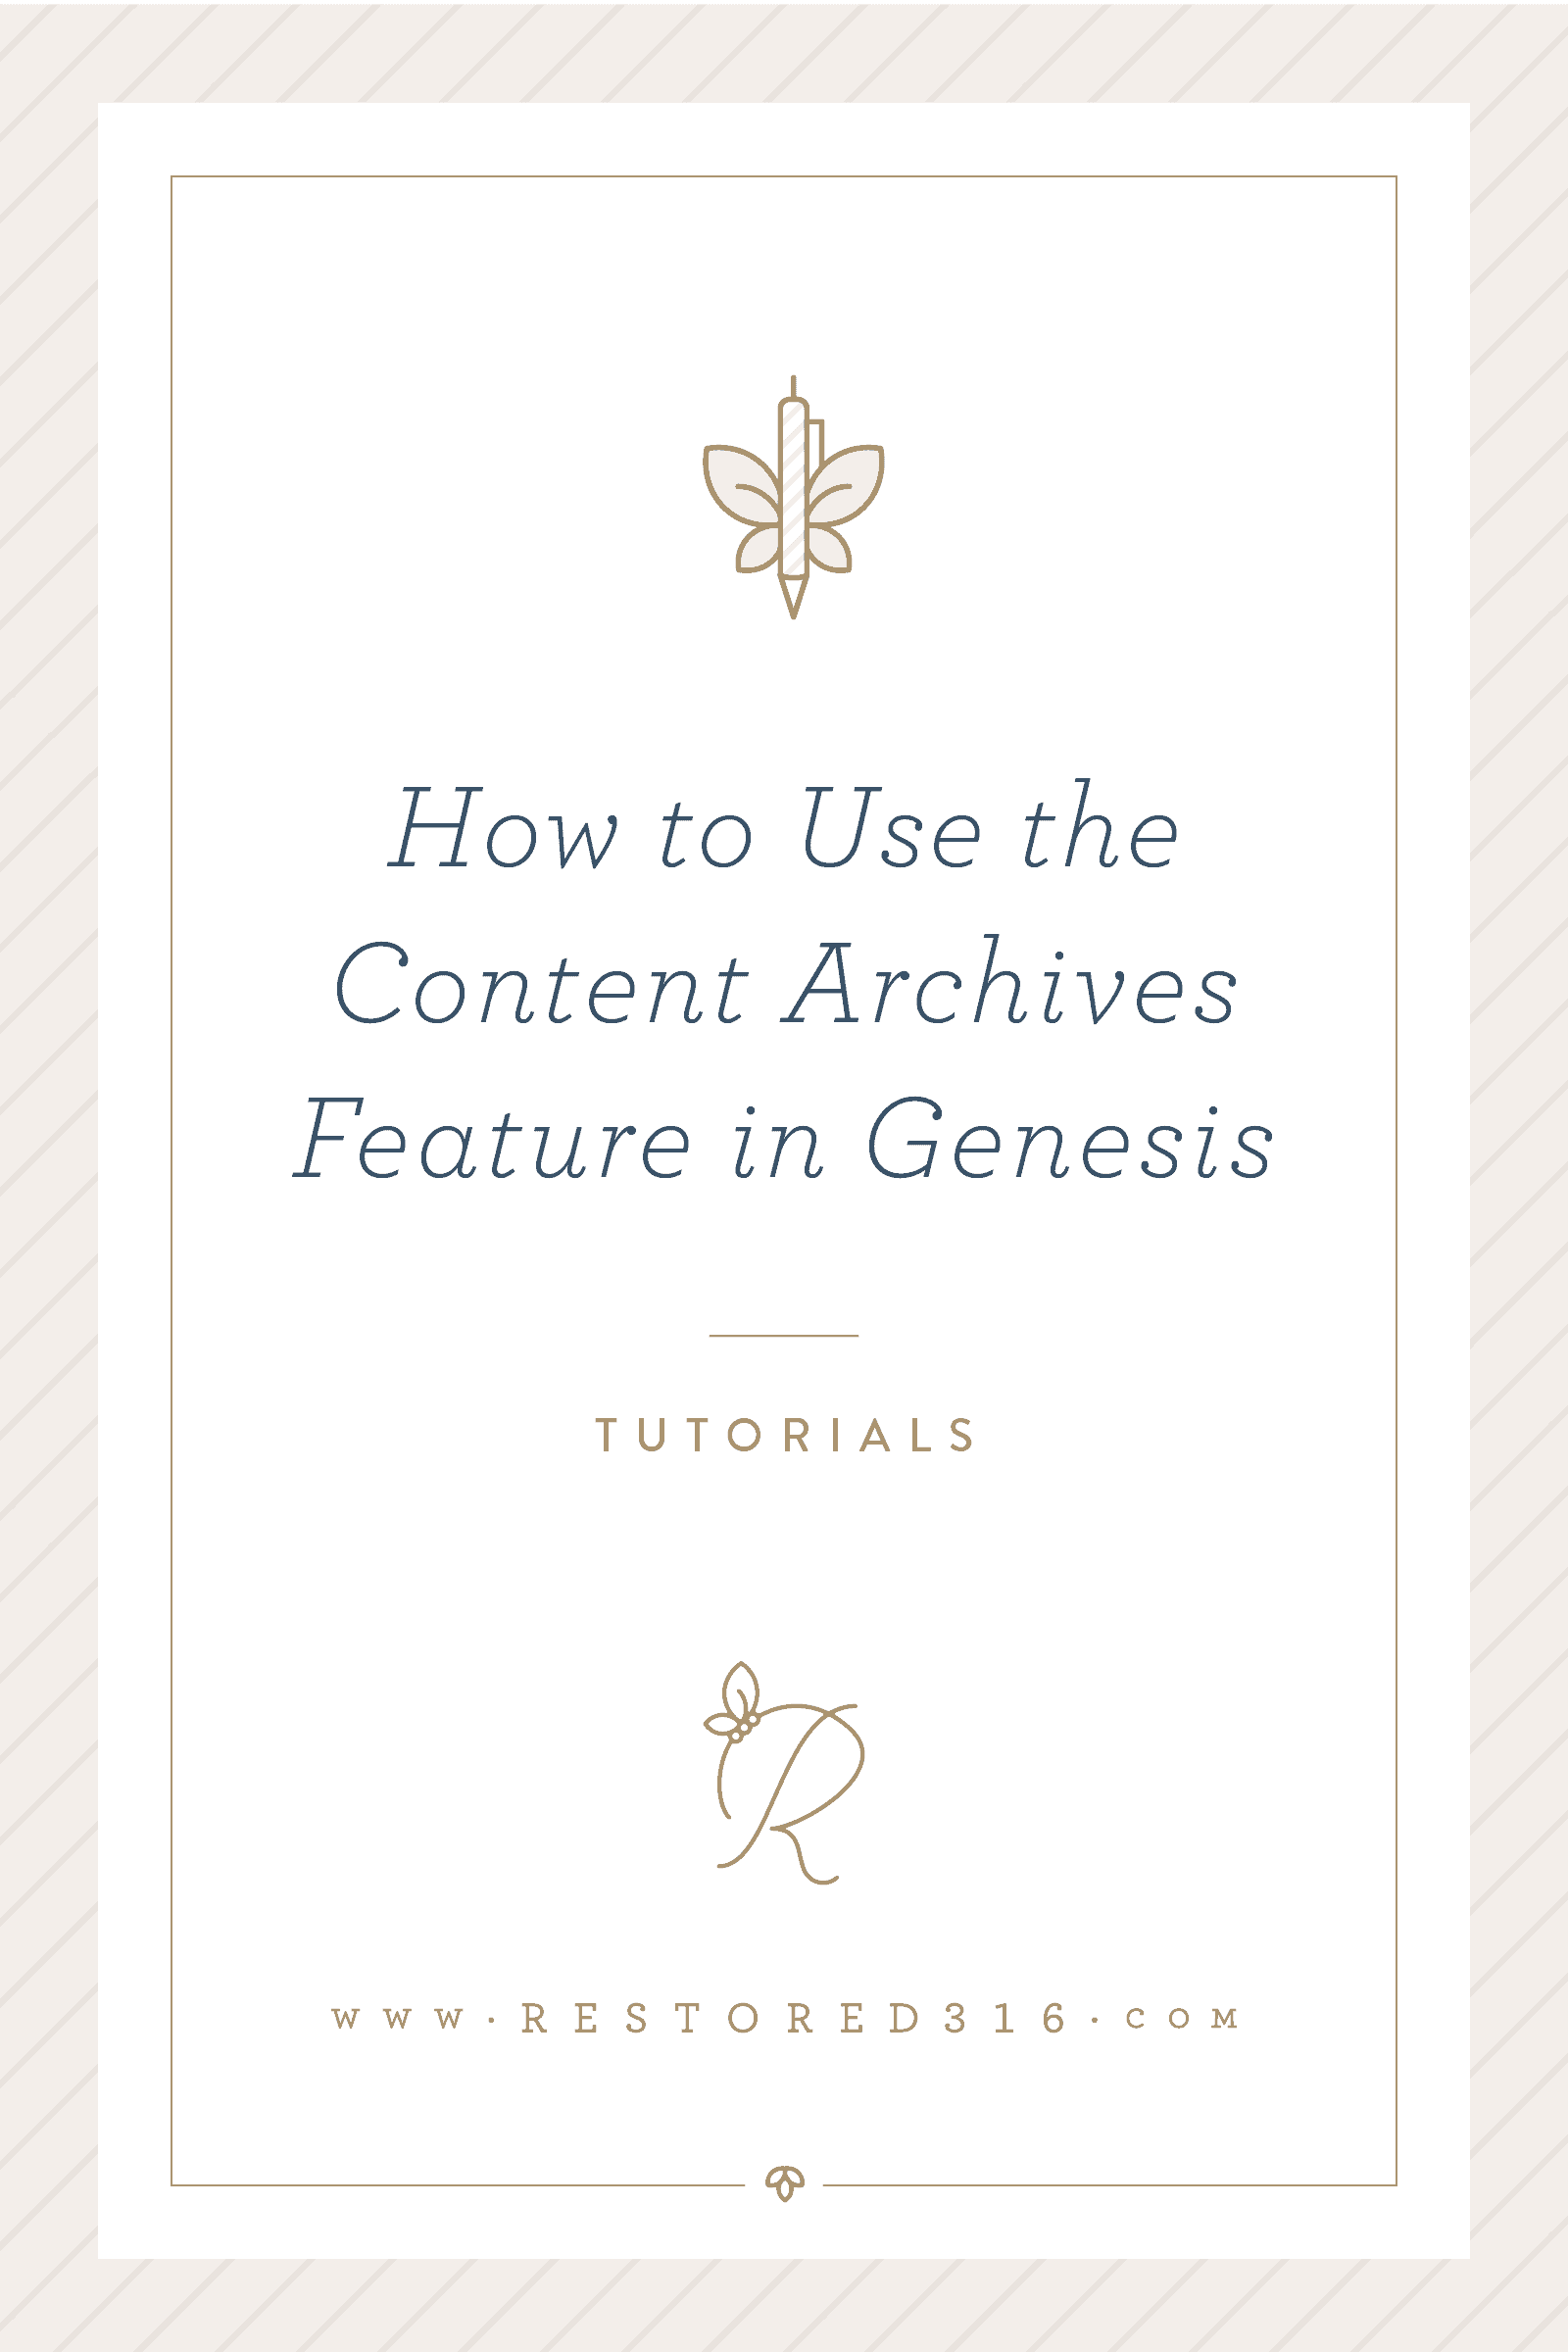 How to use the Content Archives feature in Genesis